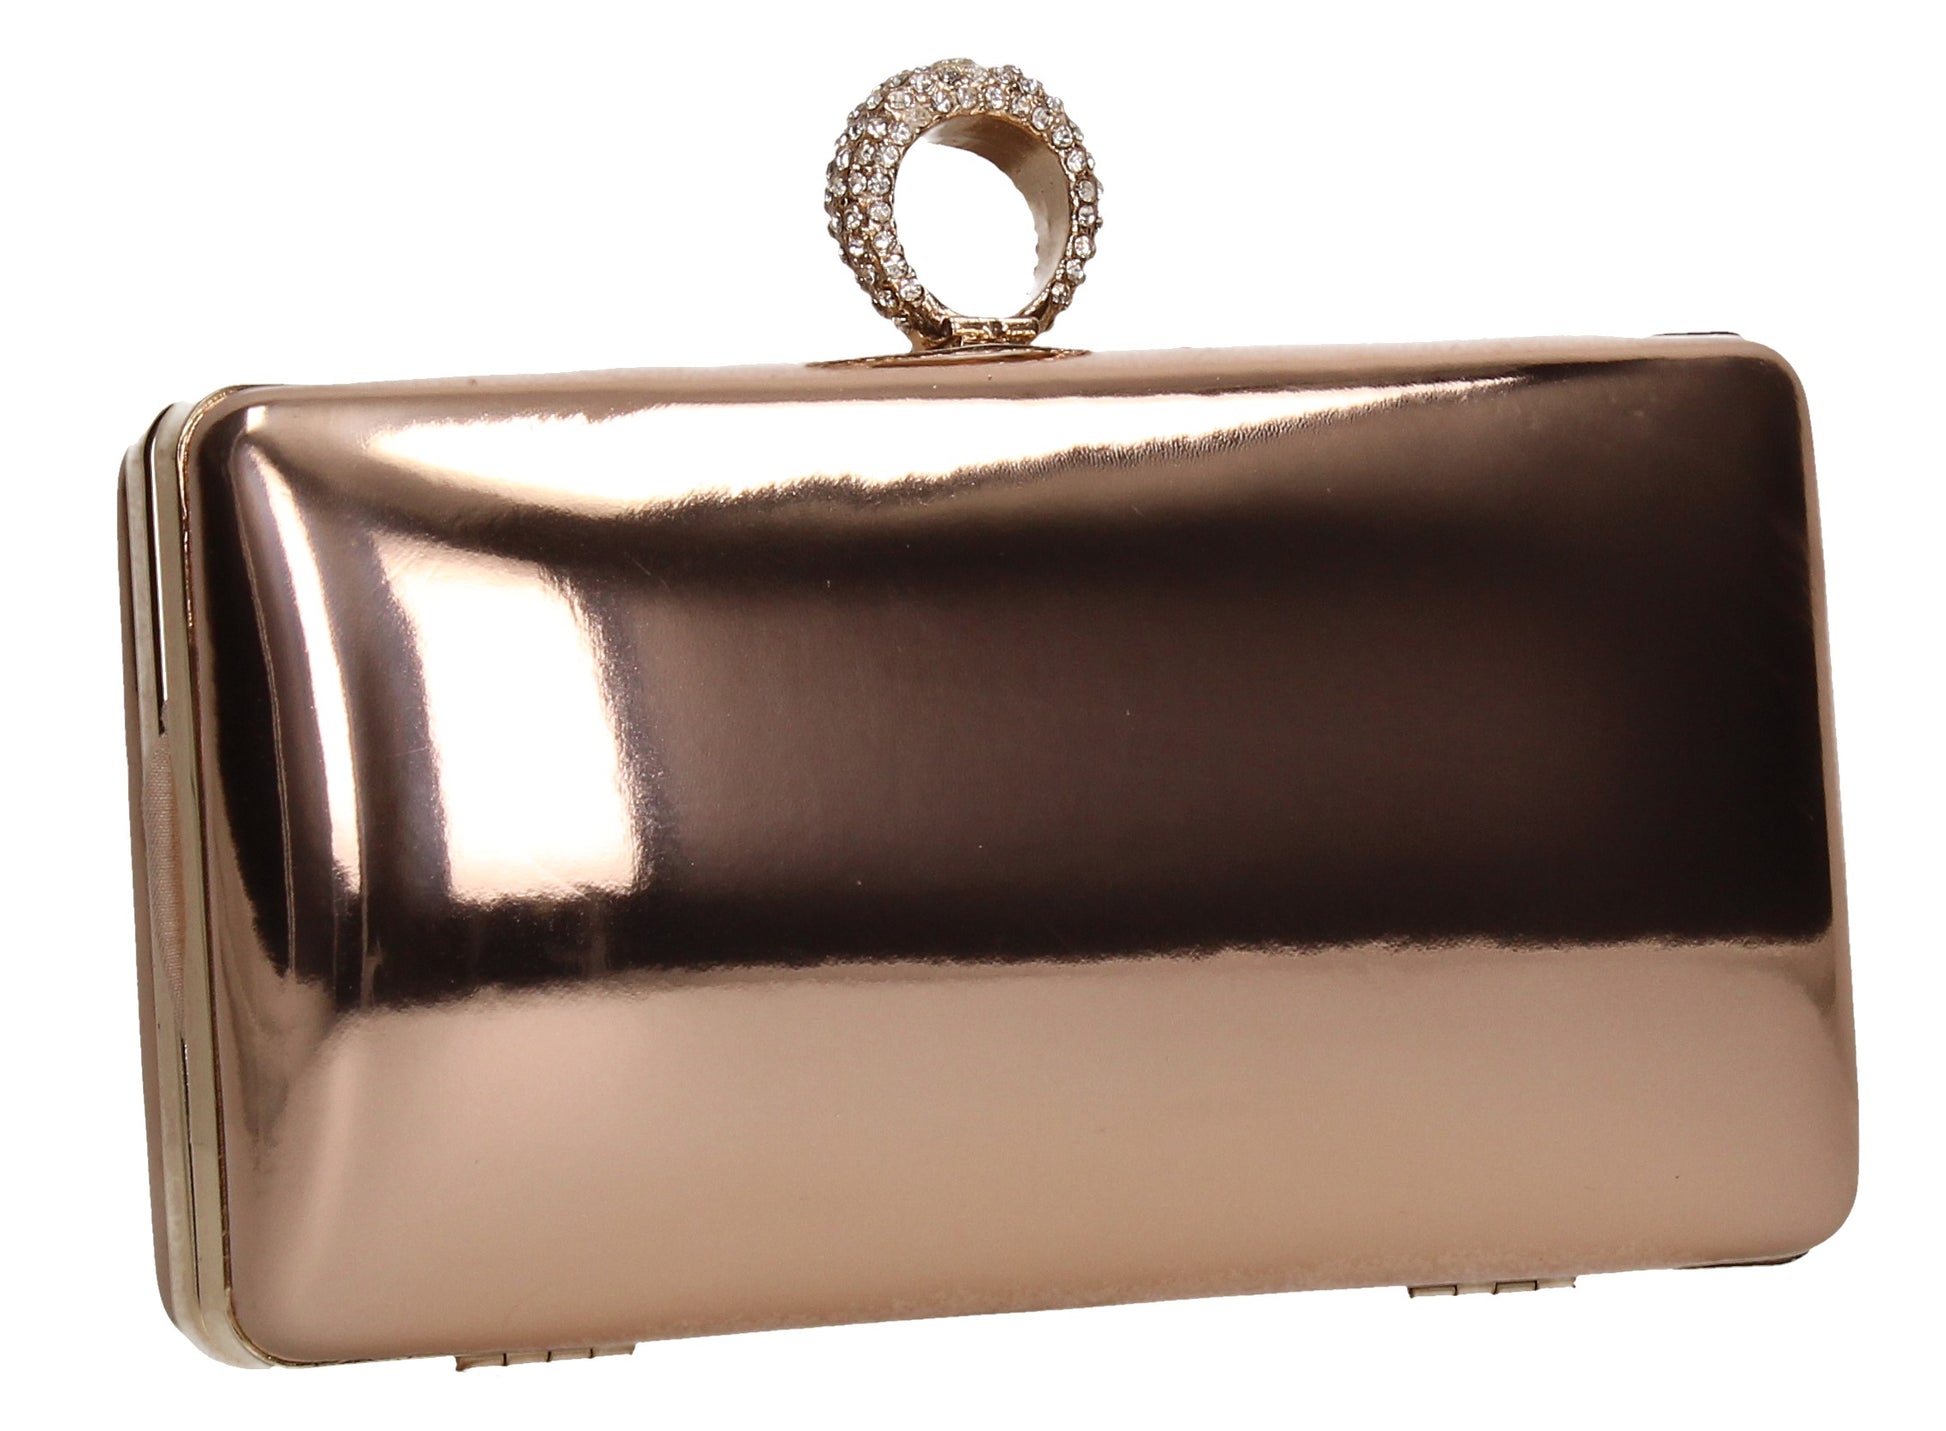 SWANKYSWANS Lyla Patent Clutch Bag Champagne Cute Cheap Clutch Bag For Weddings School and Work